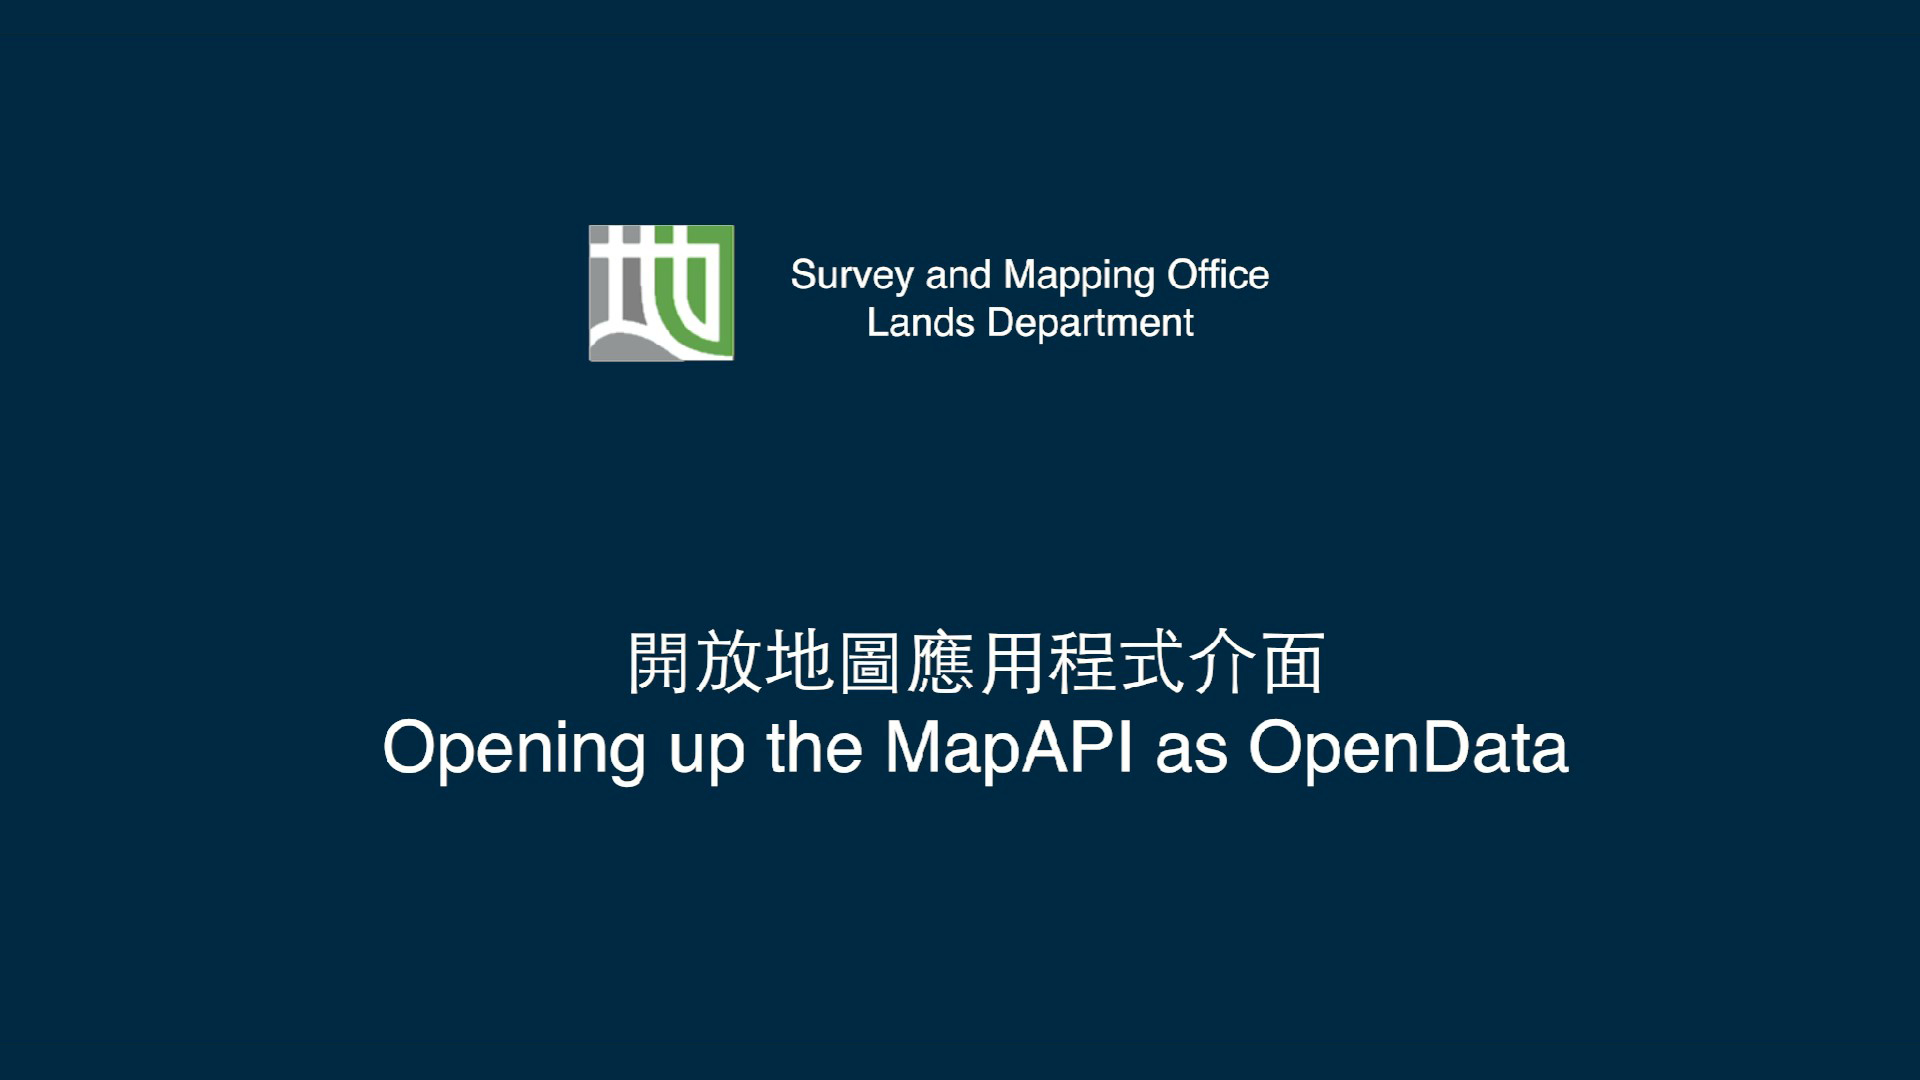 Opening up the MapAPI as OpenData